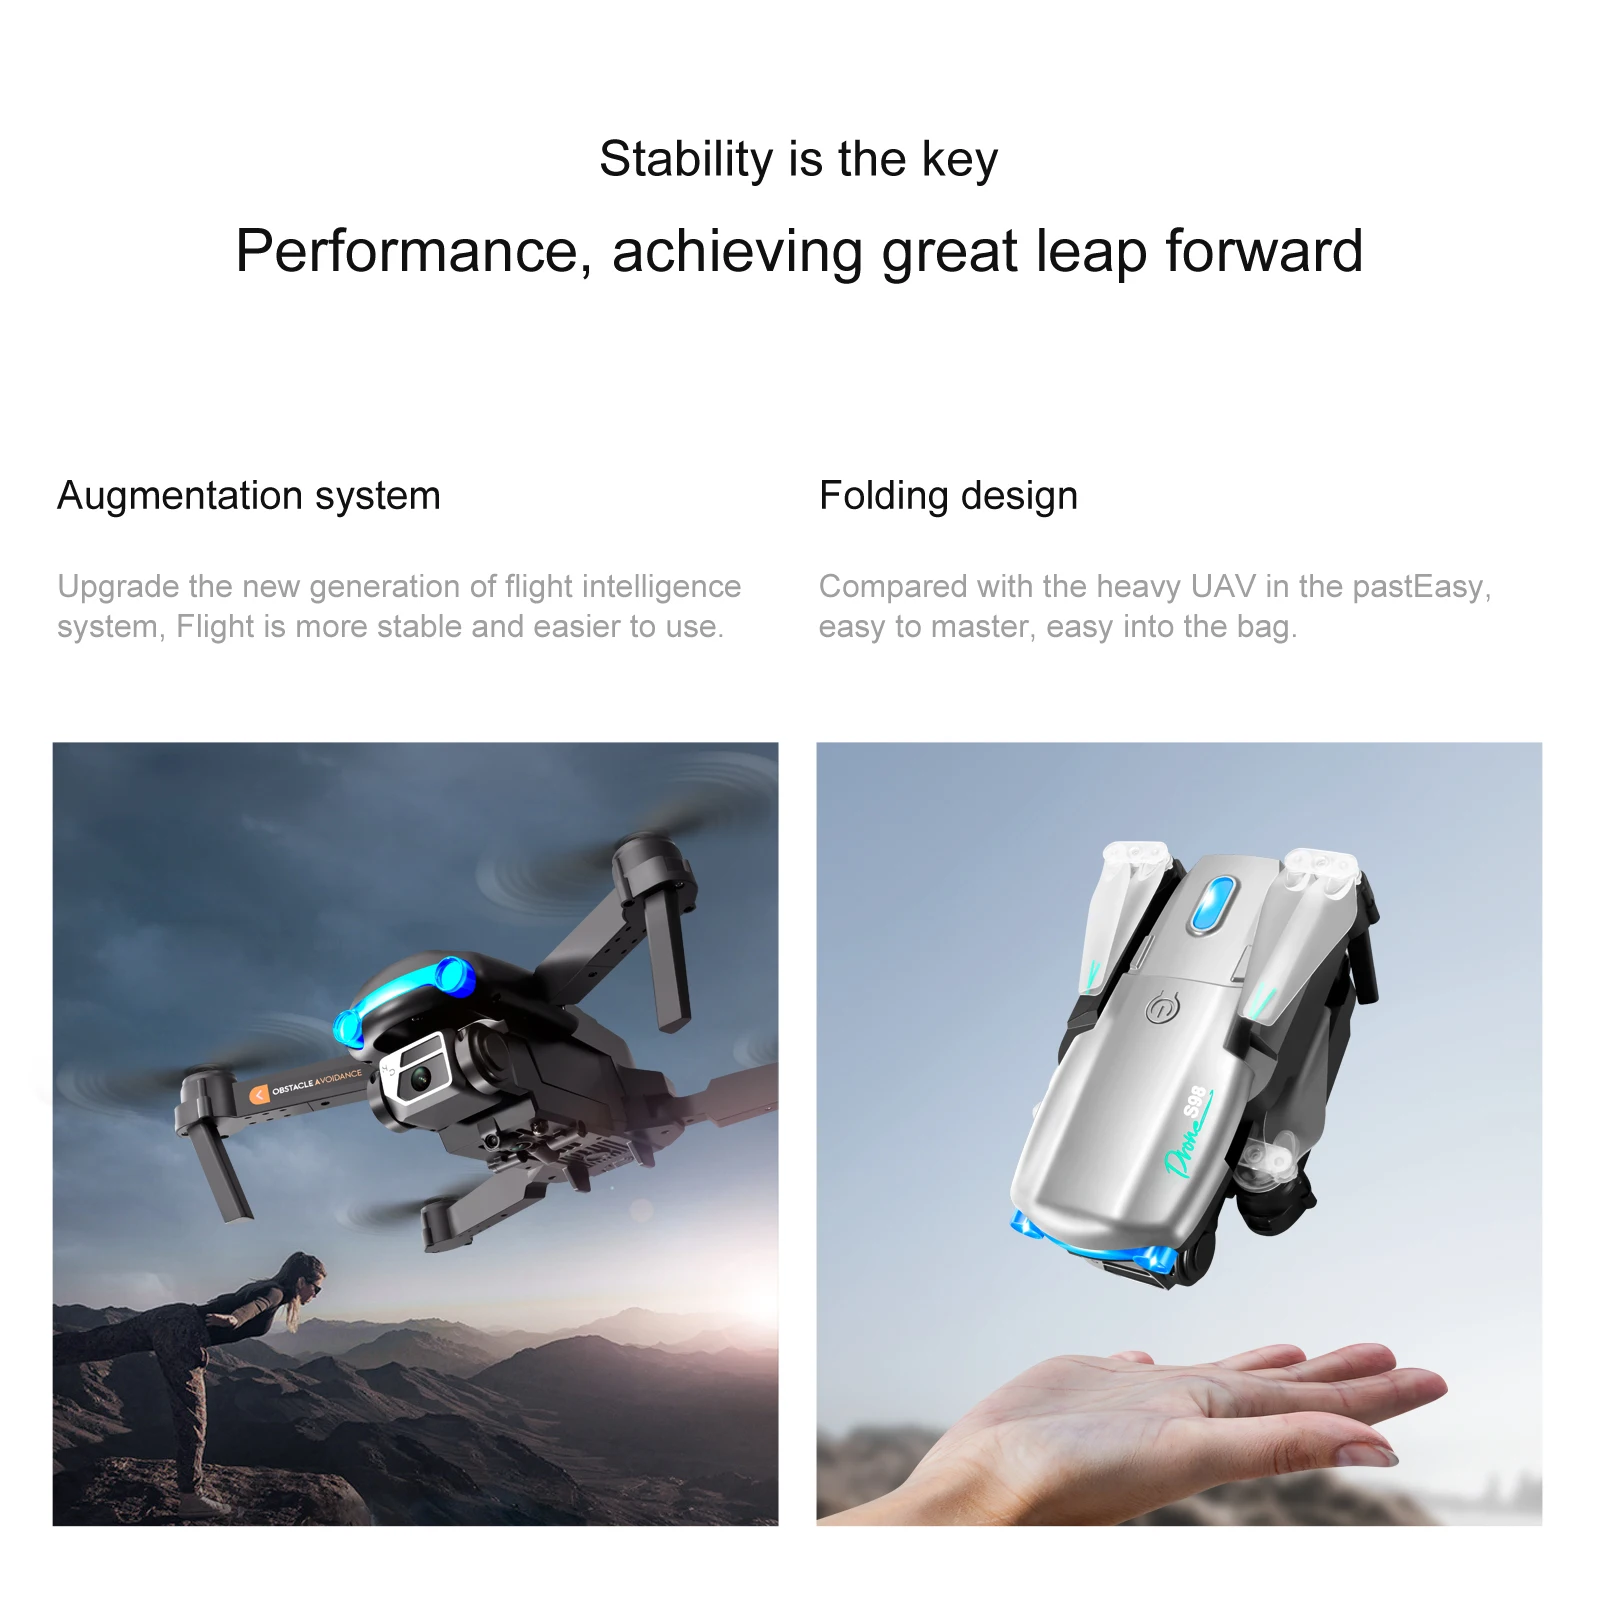 KBDFA S98 Drone, stability is the key performance, achieving great leap forward augmentation system